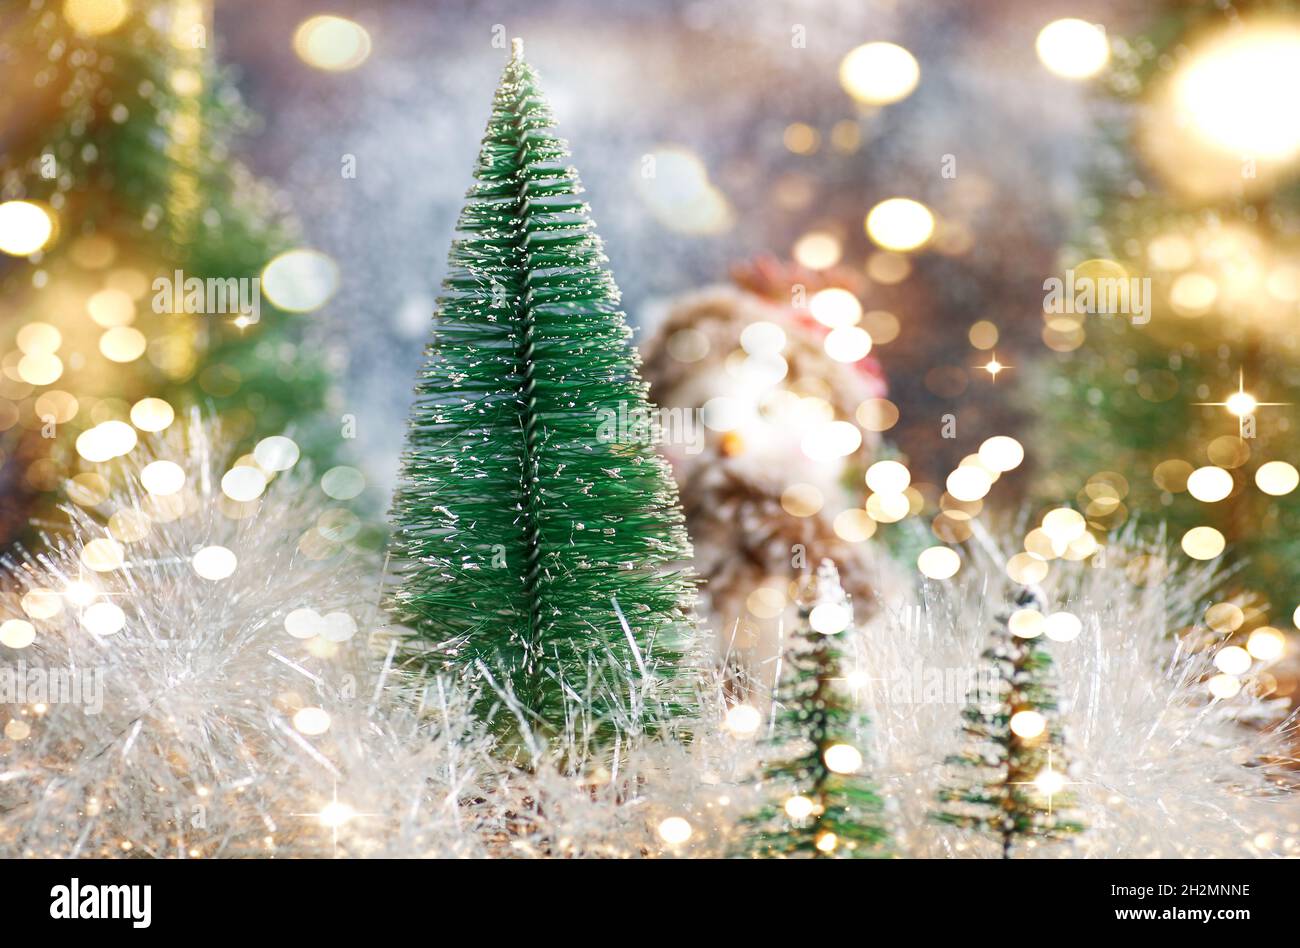 Toy snowman and Christmas tree winter holiday festive background and ornaments Stock Photo